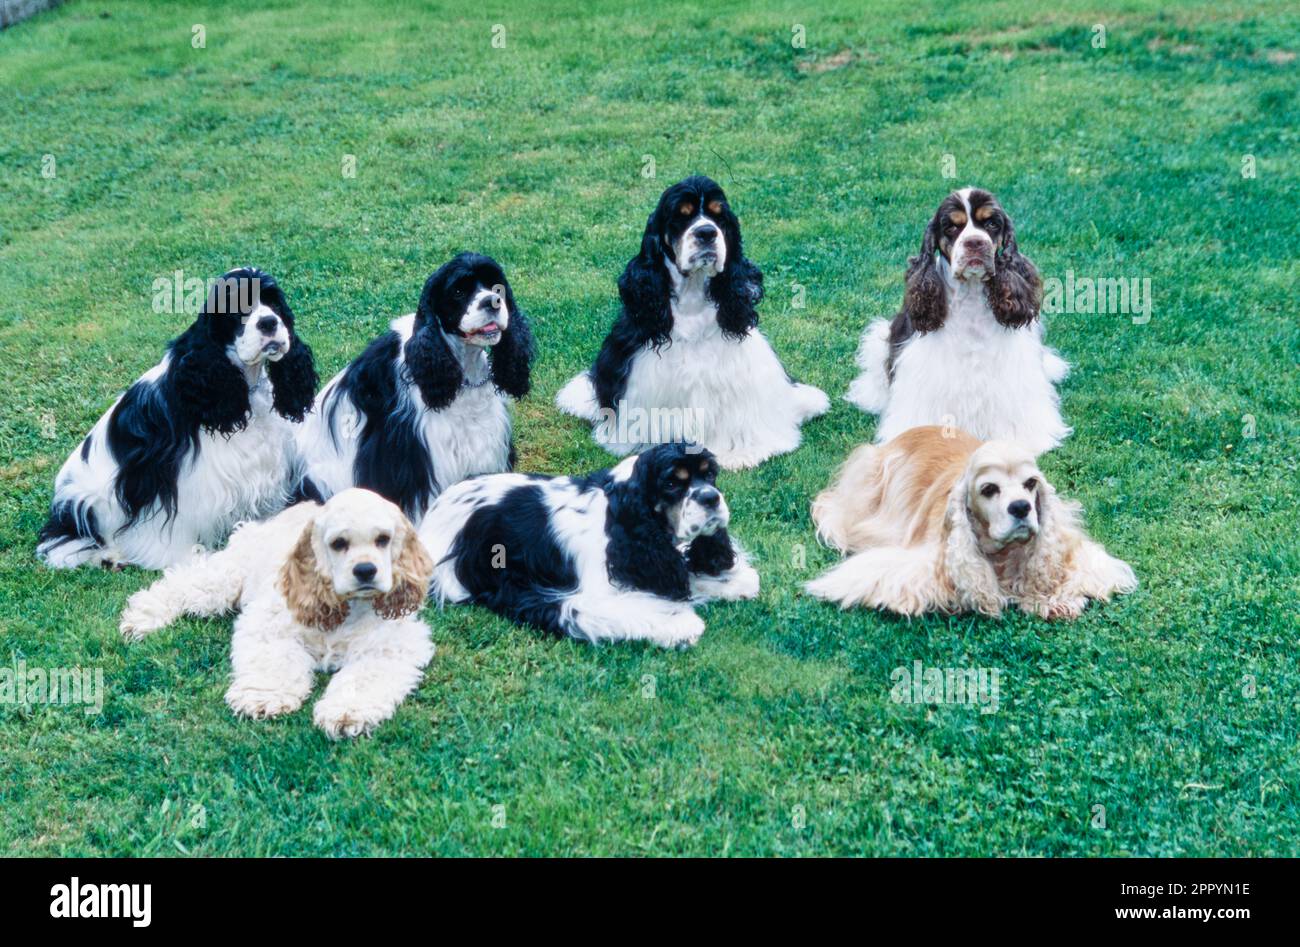 Group of American Cocker Spaniels sitting on grass outside Stock Photo